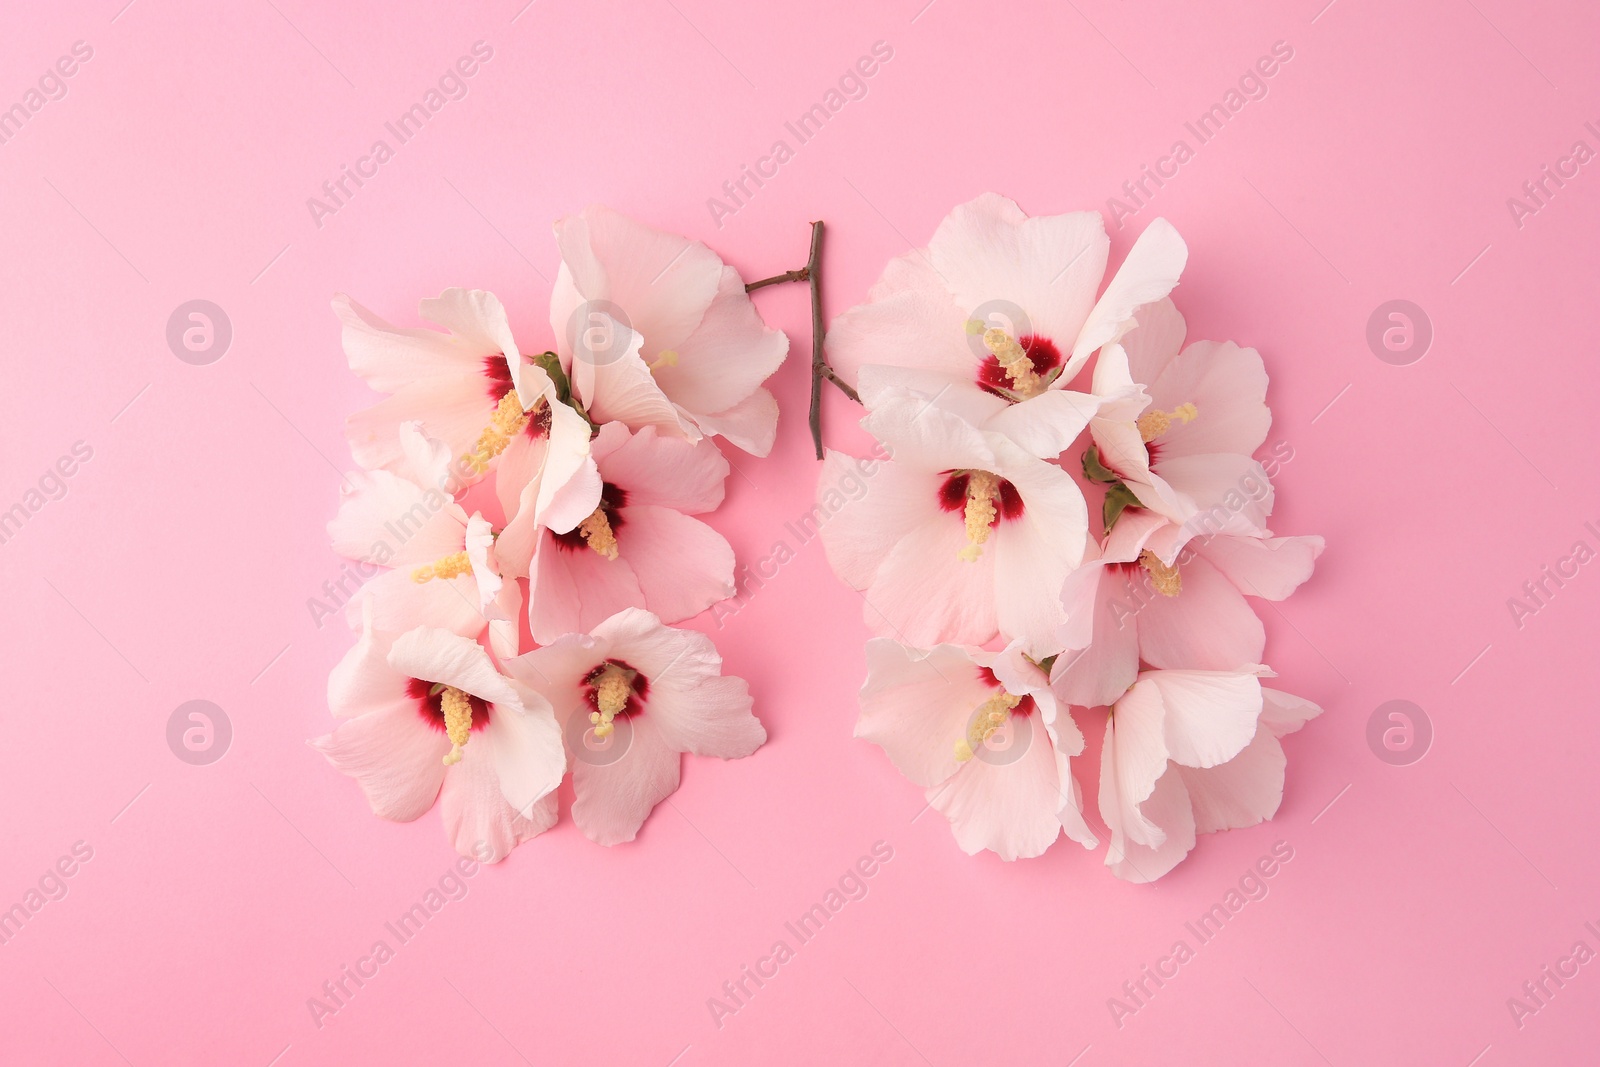 Photo of Human lungs made of white flowers on pink background, flat lay